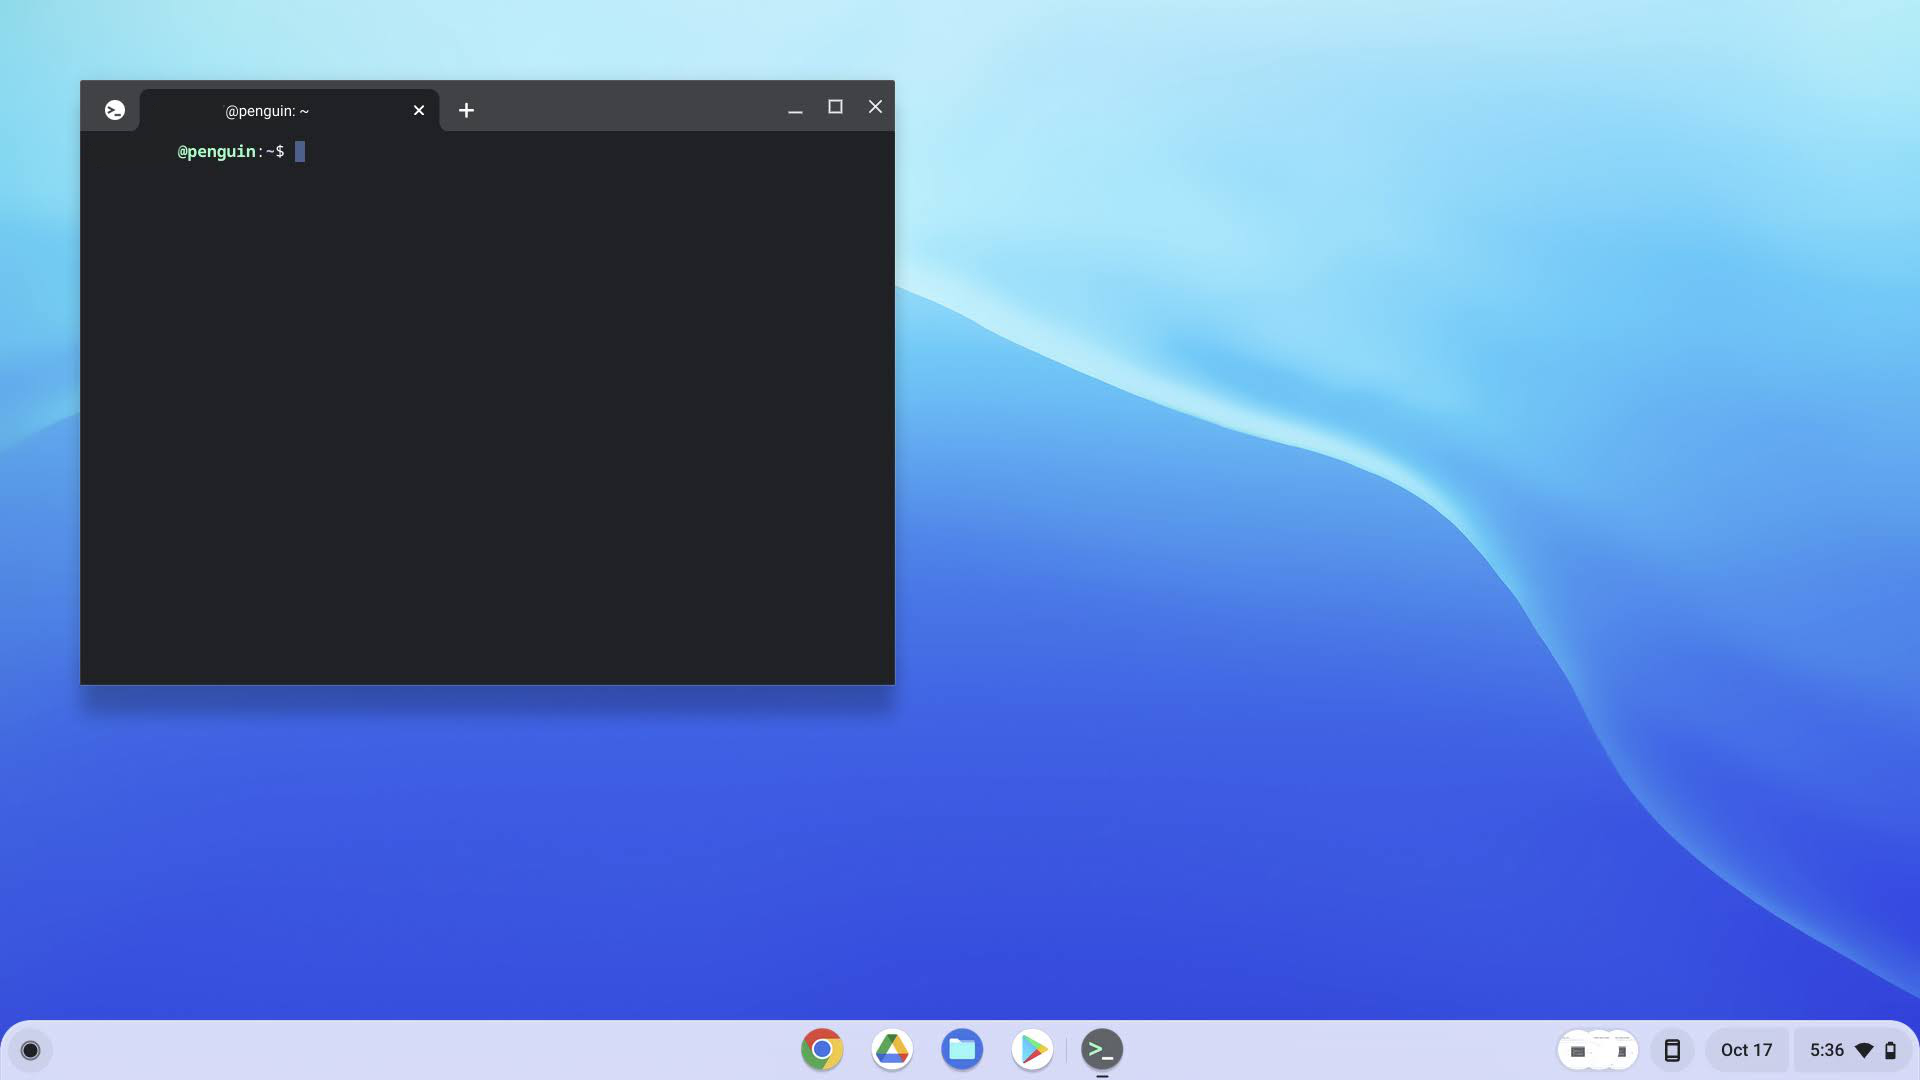 Enable Linux apps on Chromebook 5